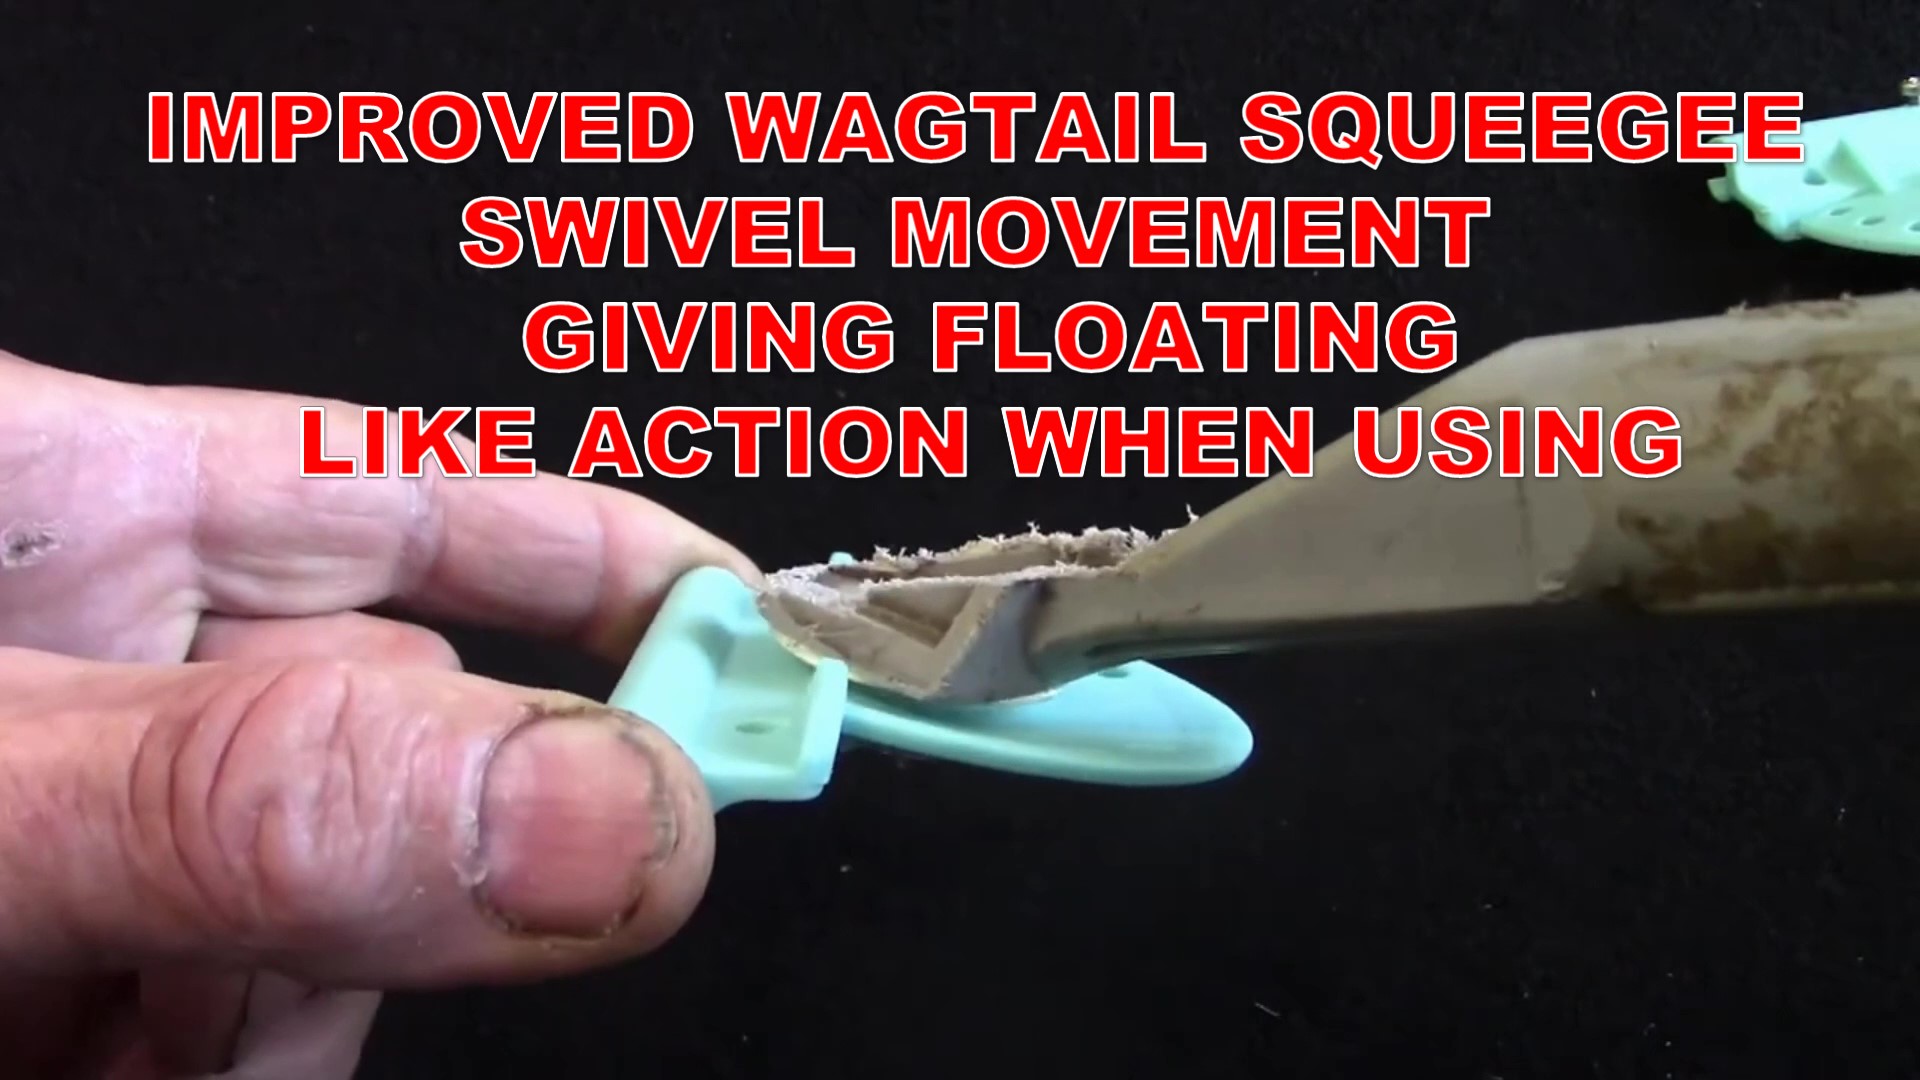 How we improved wagtail squeegee swivel movement using a pvc